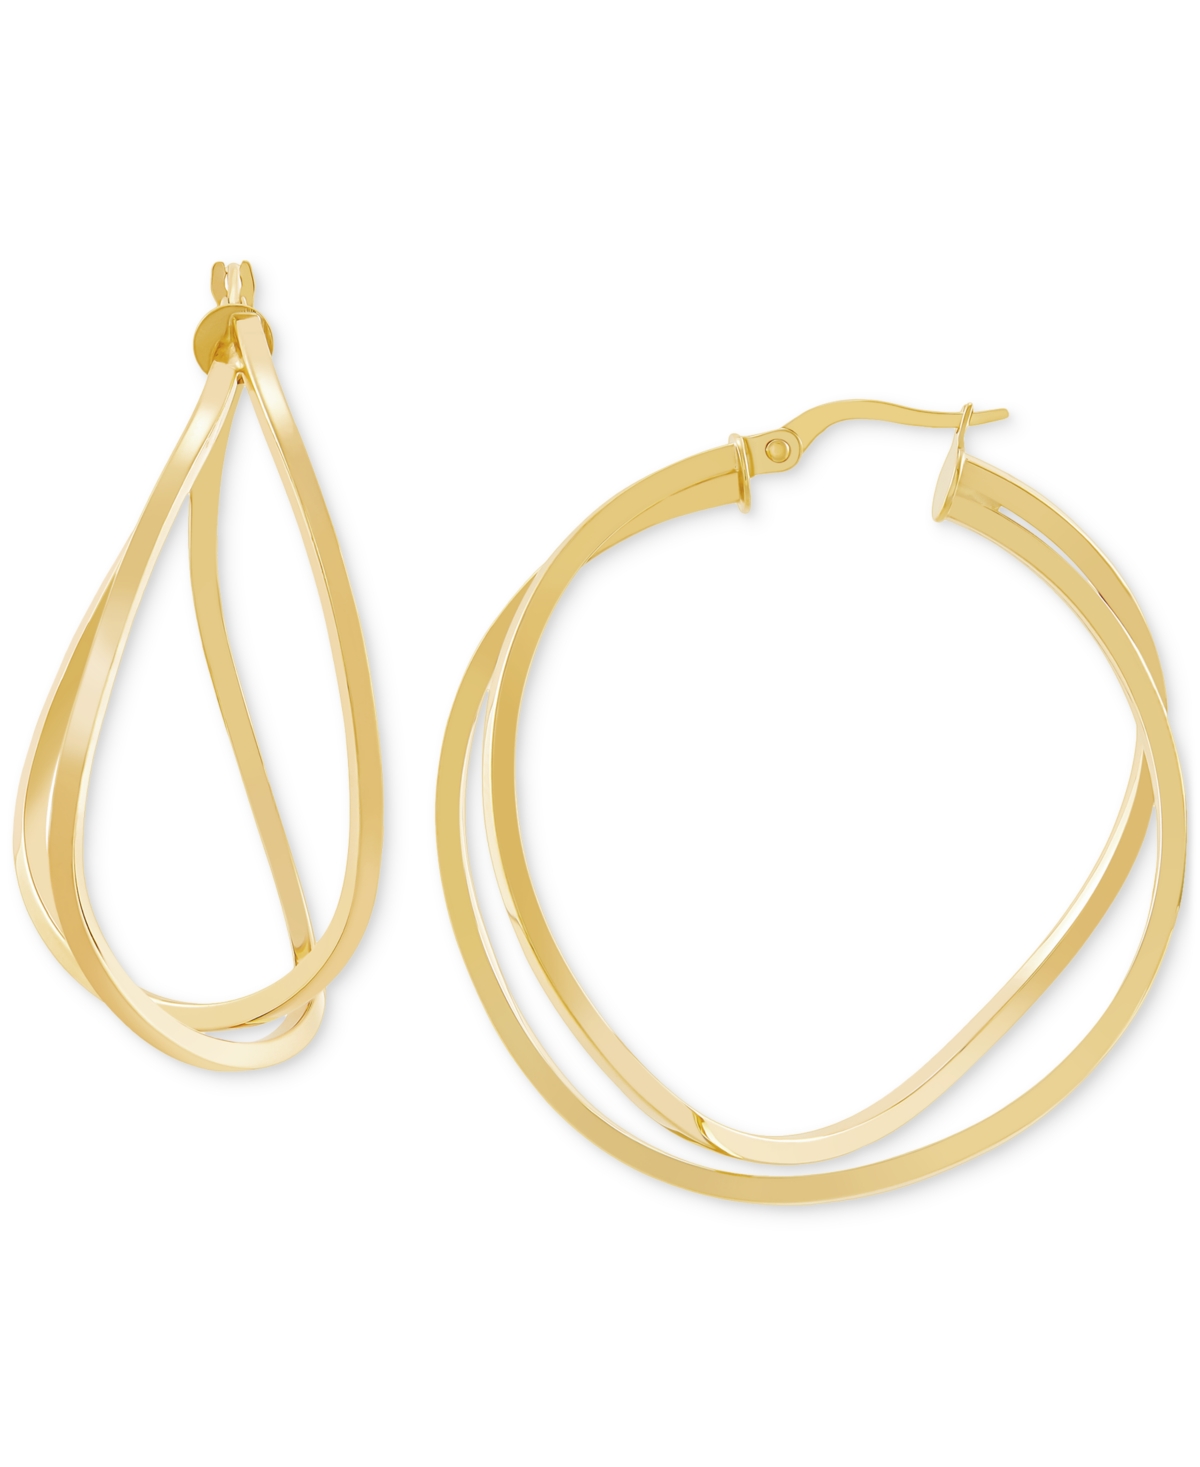 Polished Crossover Double Medium Hoop Earrings in 14k Gold, 1-1/4" - Yellow Gold